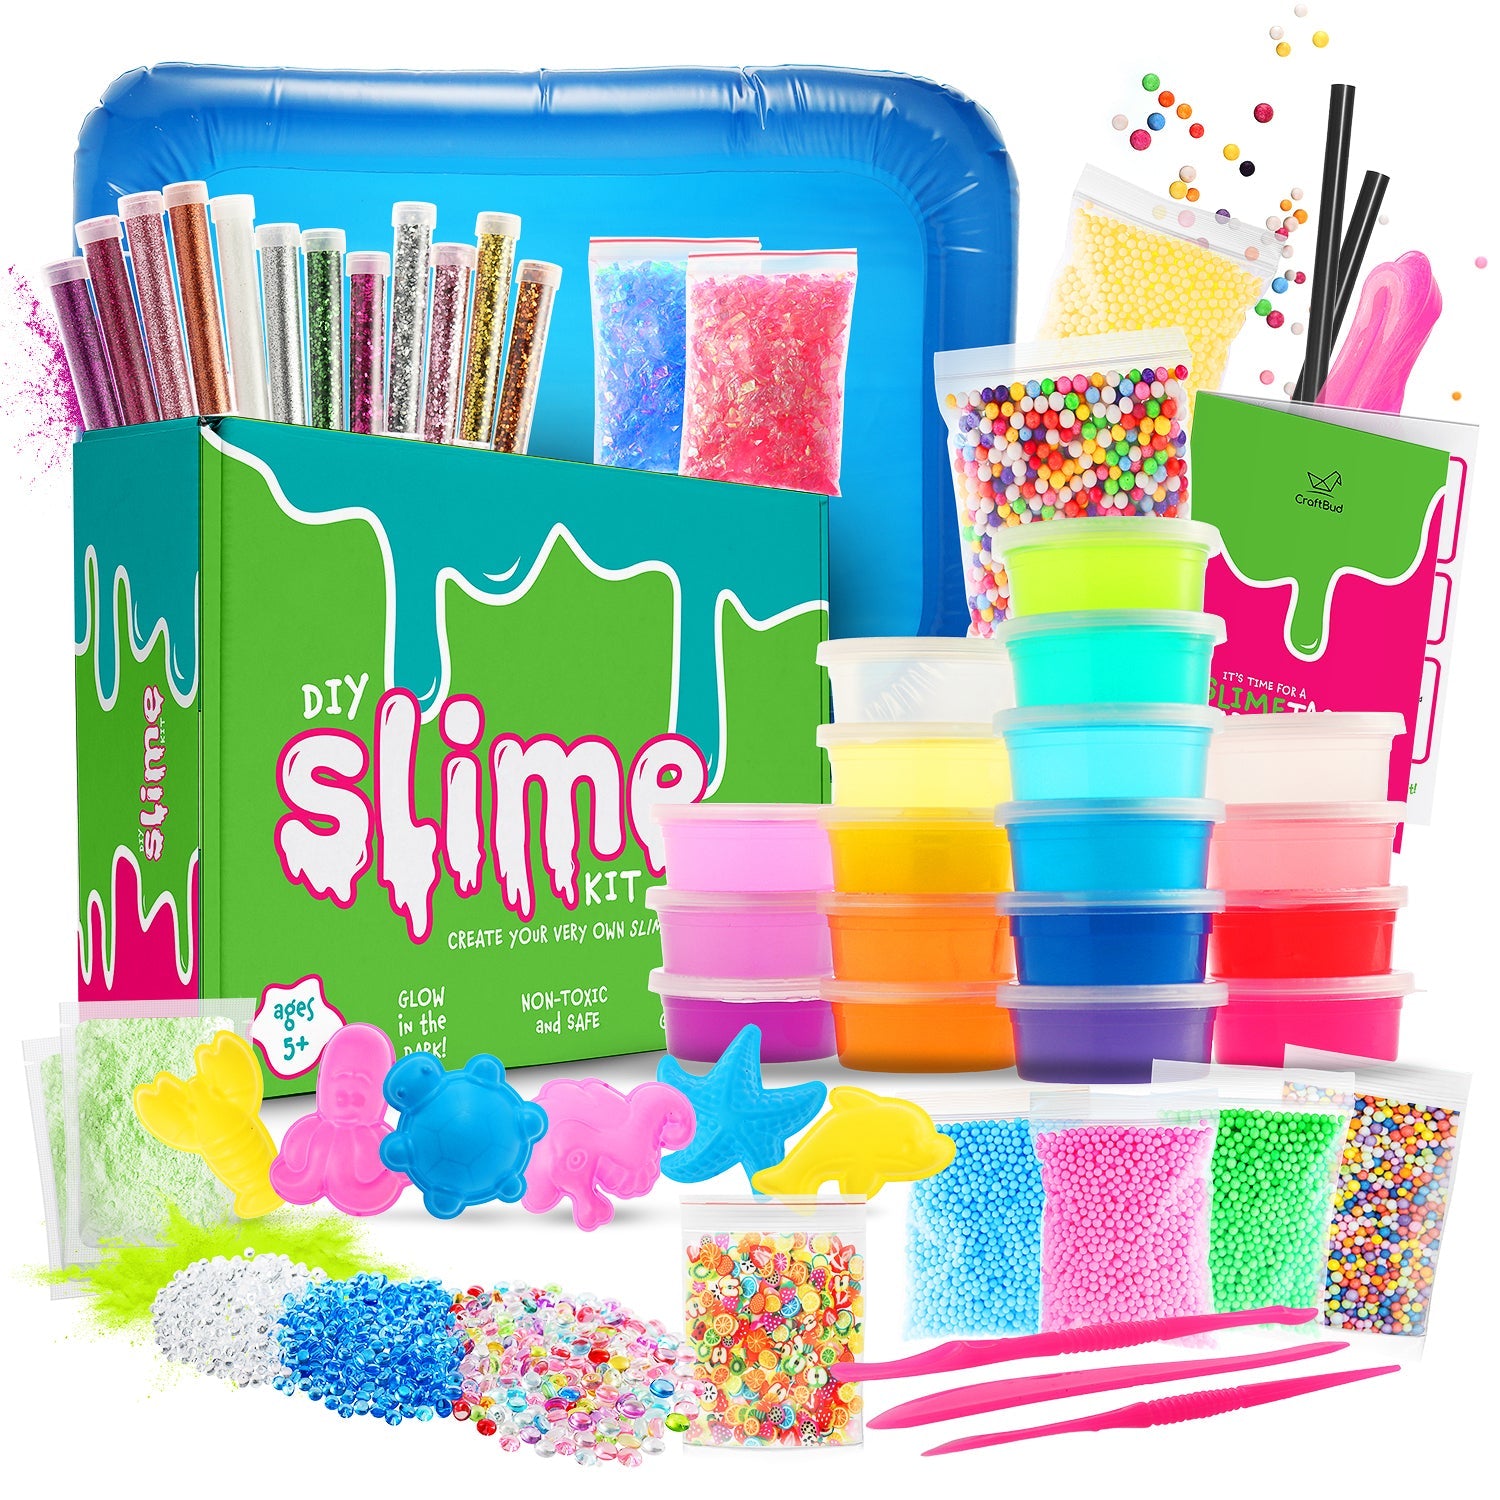 Tie Dye Slime Mix Kit DIY Make Your Own Colourful Glitter Slimes